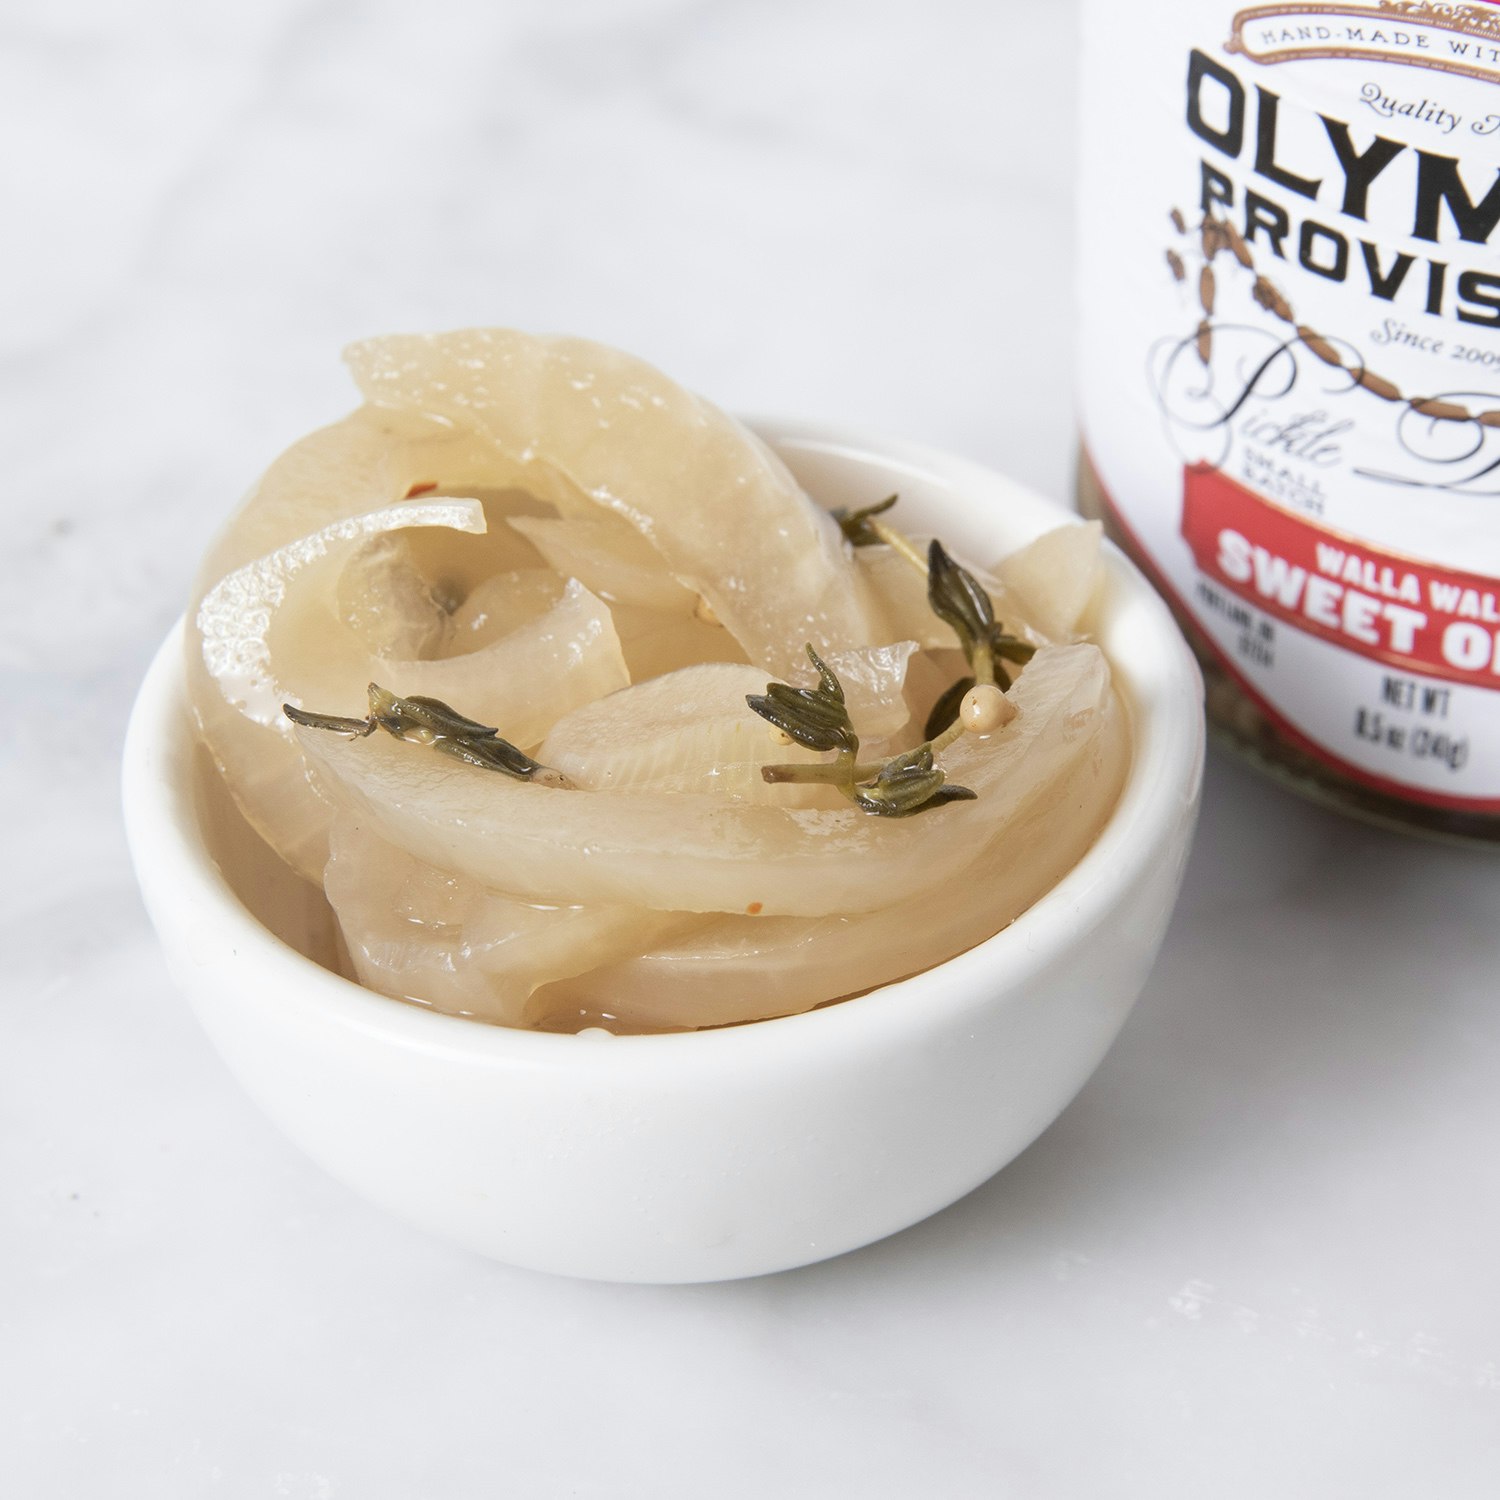 Olympia Provisions Pickled Walla Walla Sweet Onions specialty foods